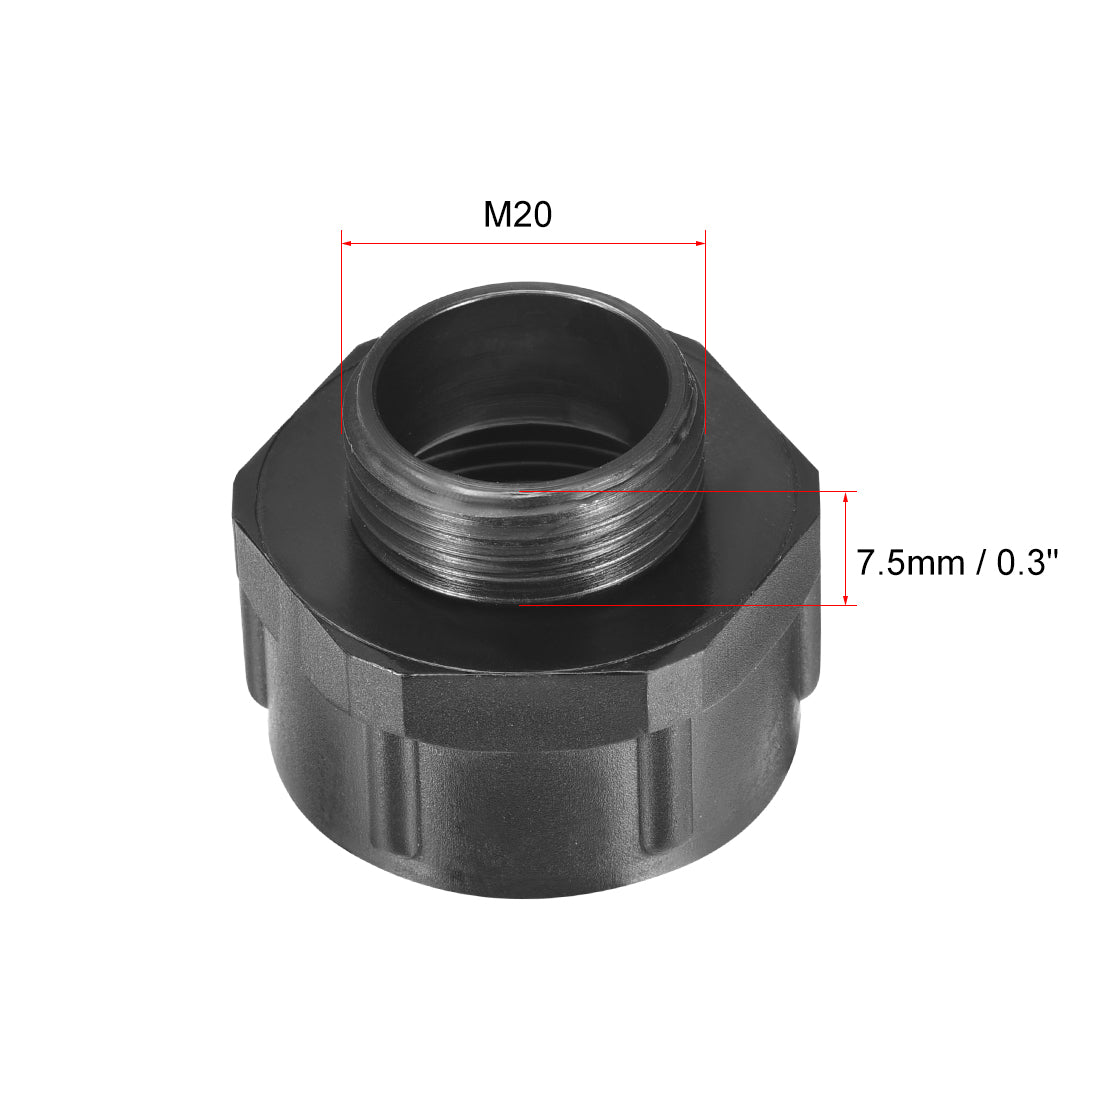 Uxcell Uxcell Threaded Bushings Nylon Connector Adaptor M20 Outer Thread to M25 Inner Thread Black